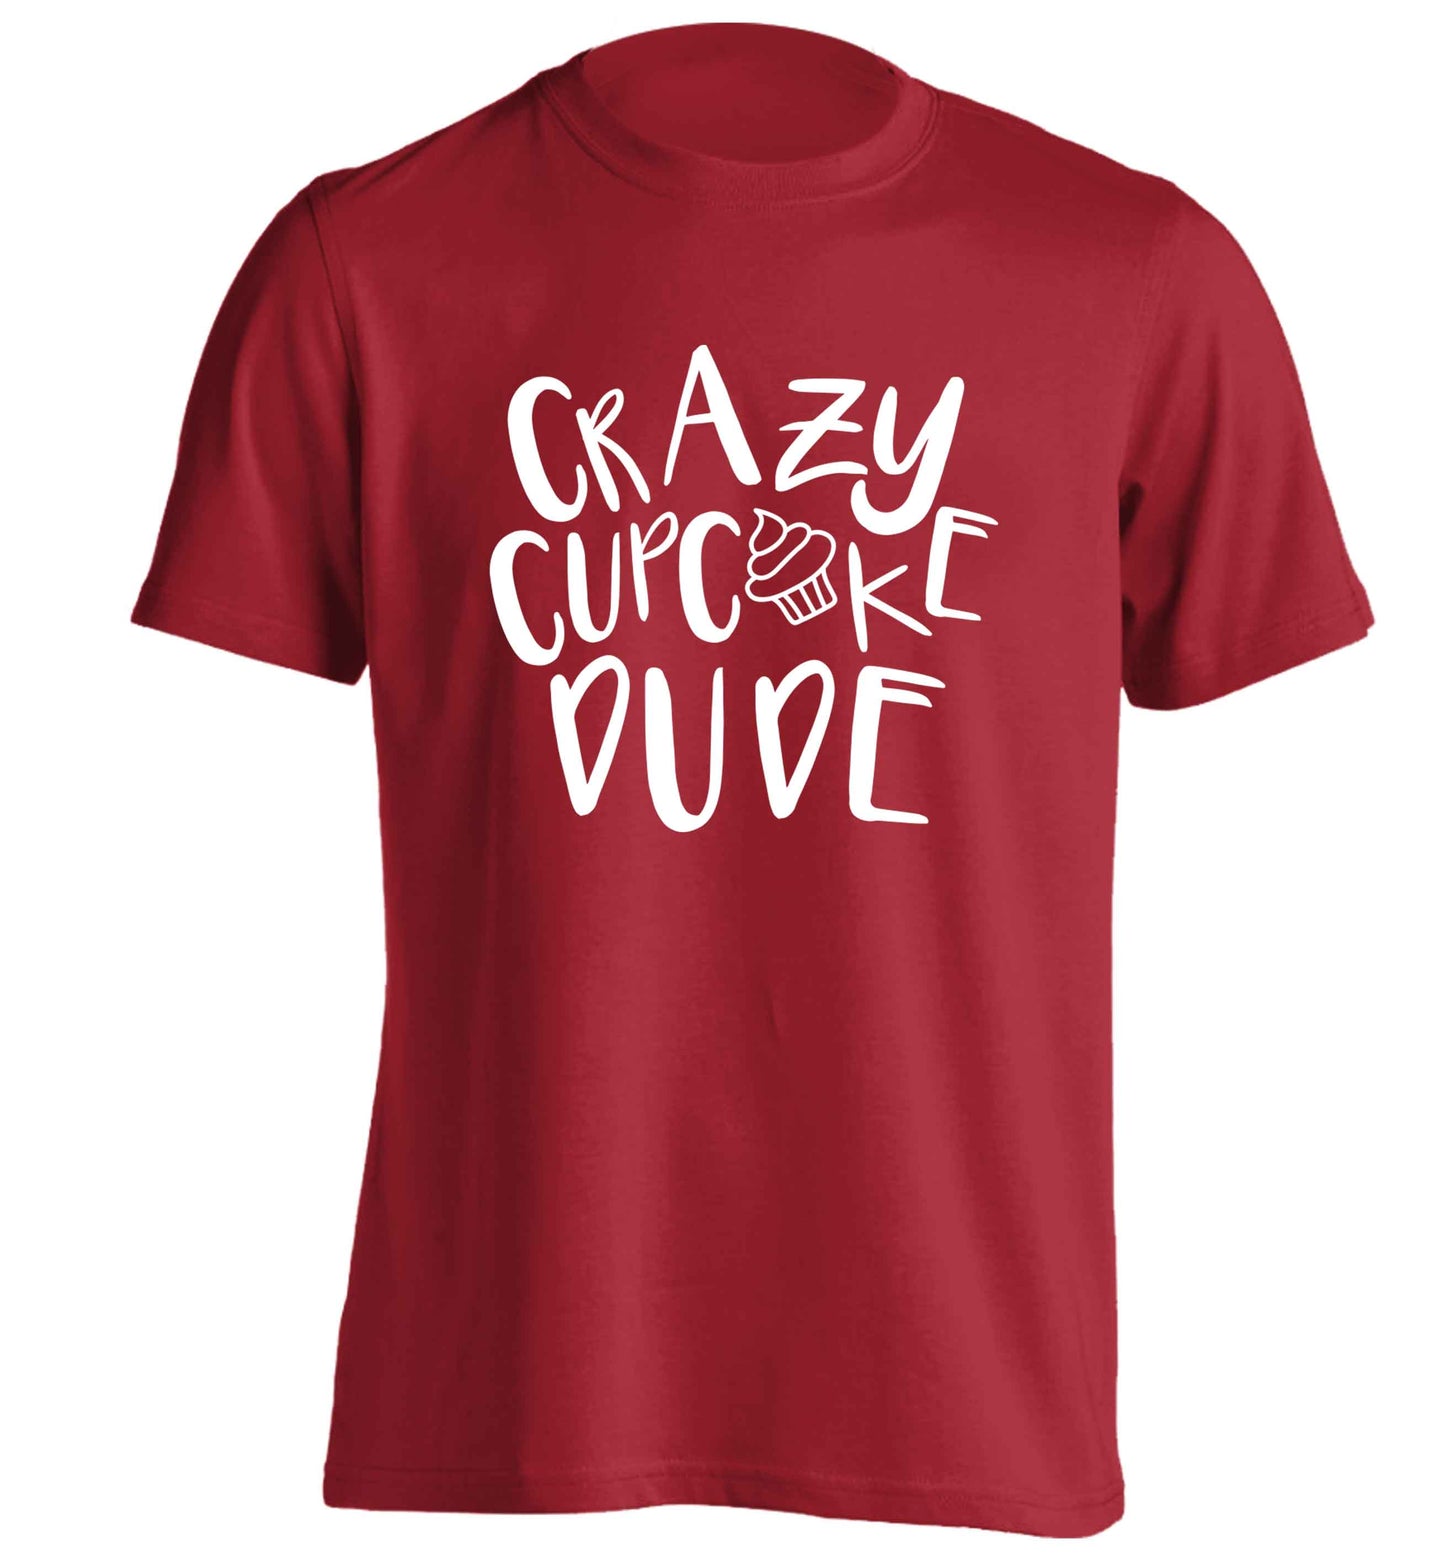 Crazy cupcake dude adults unisex red Tshirt 2XL